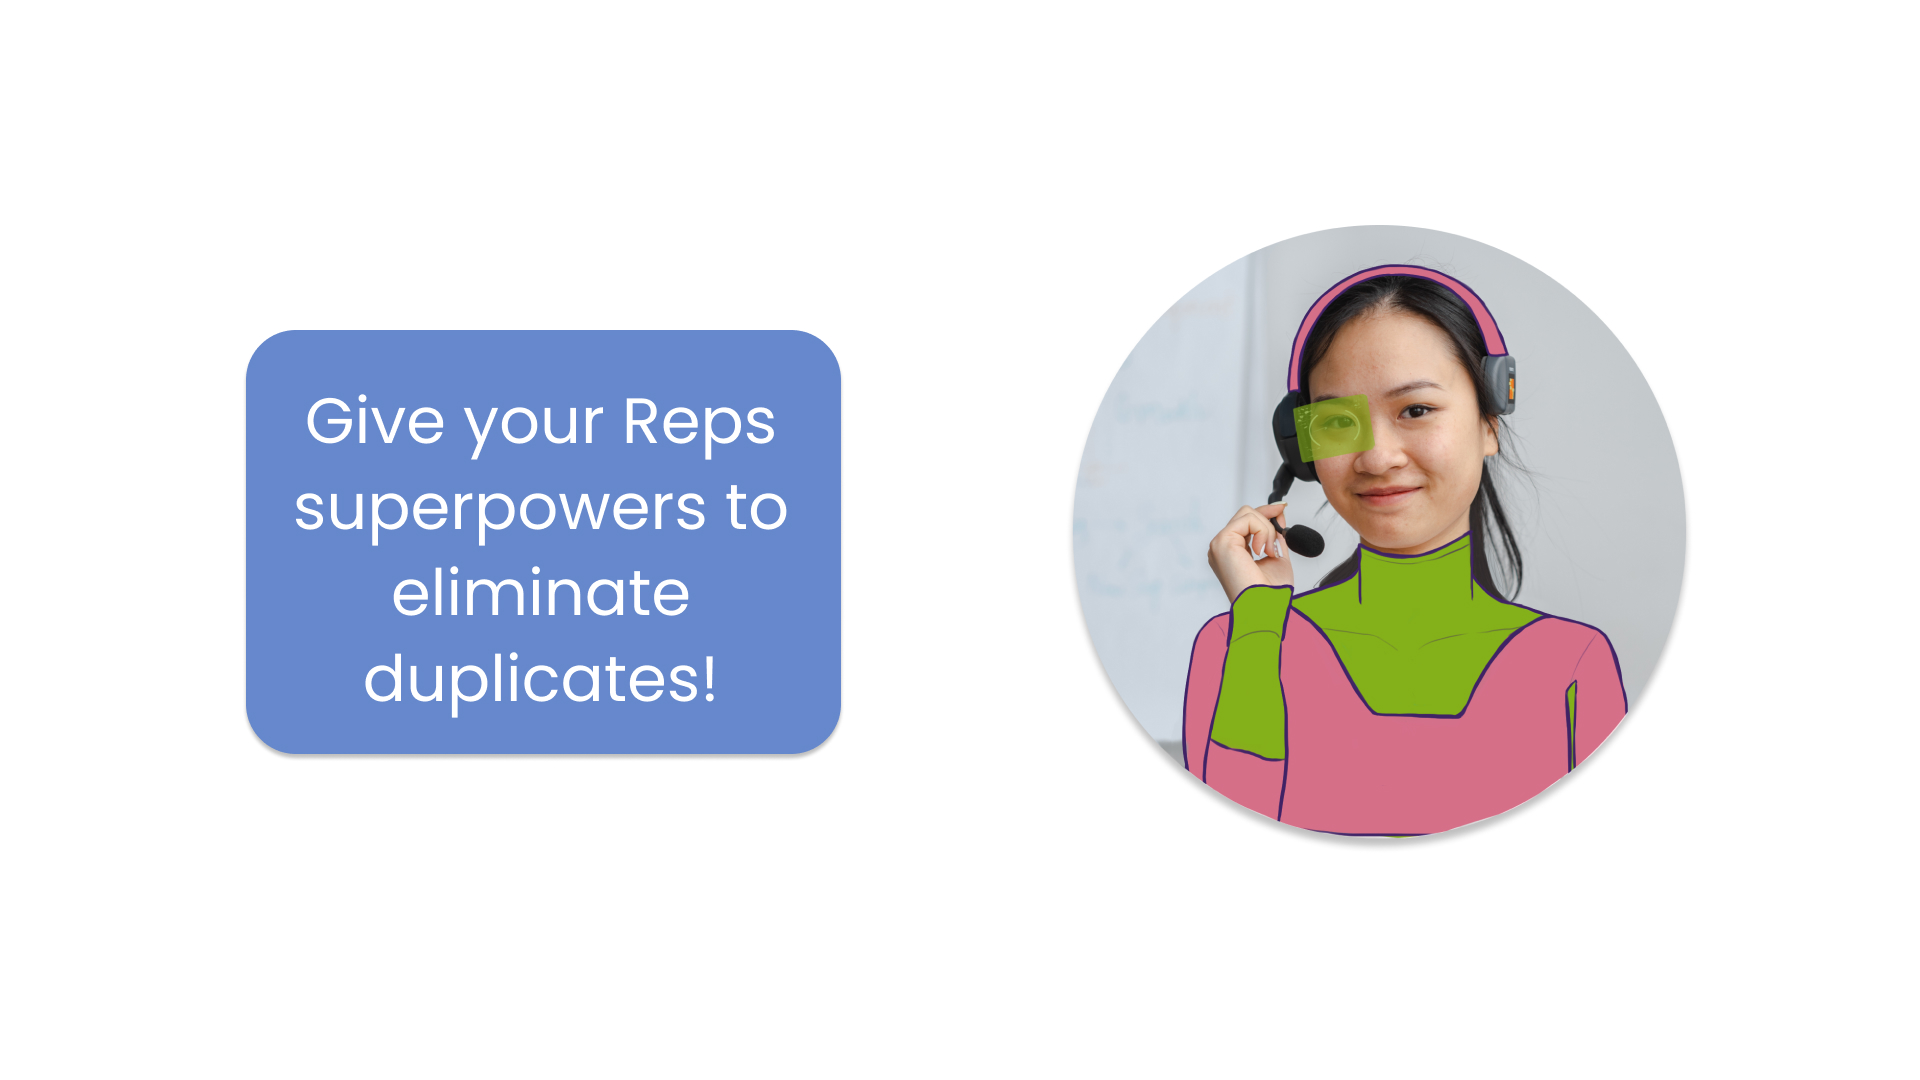 End users can download this Delpha conversation to get superpowers to eliminate duplicate cases inside Salesforce Service Cloud.